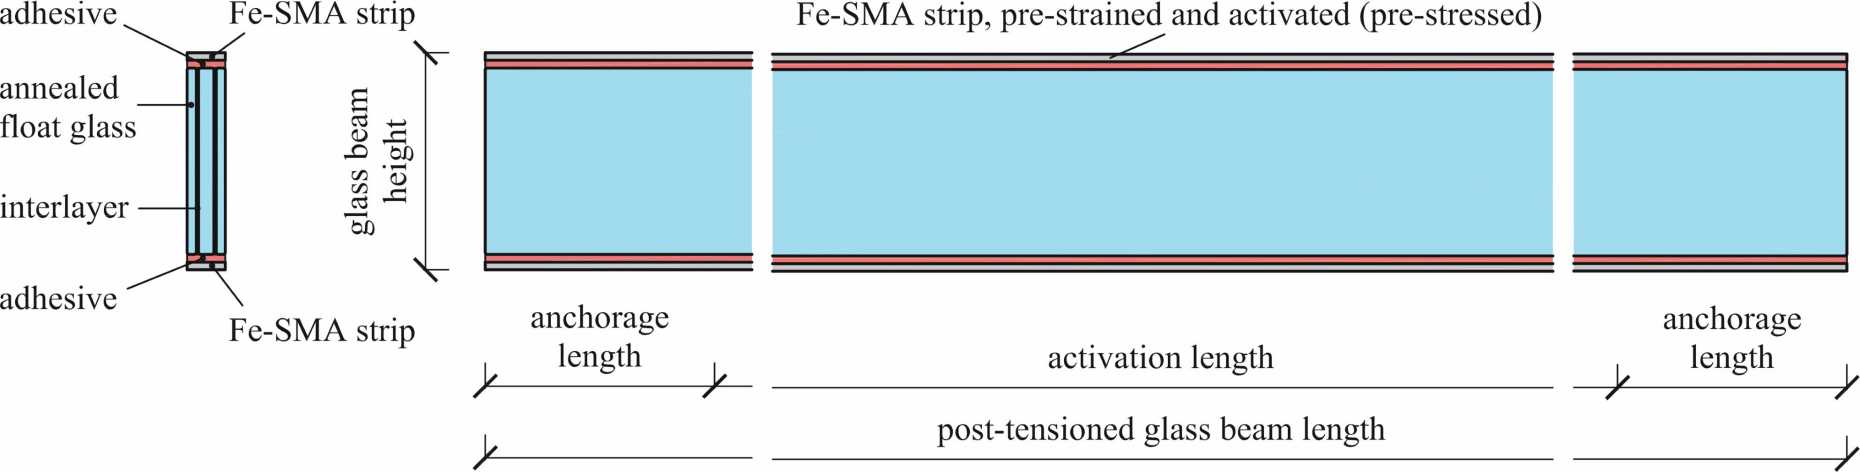 Concept for post-tensioned glass beams with Fe-SMA